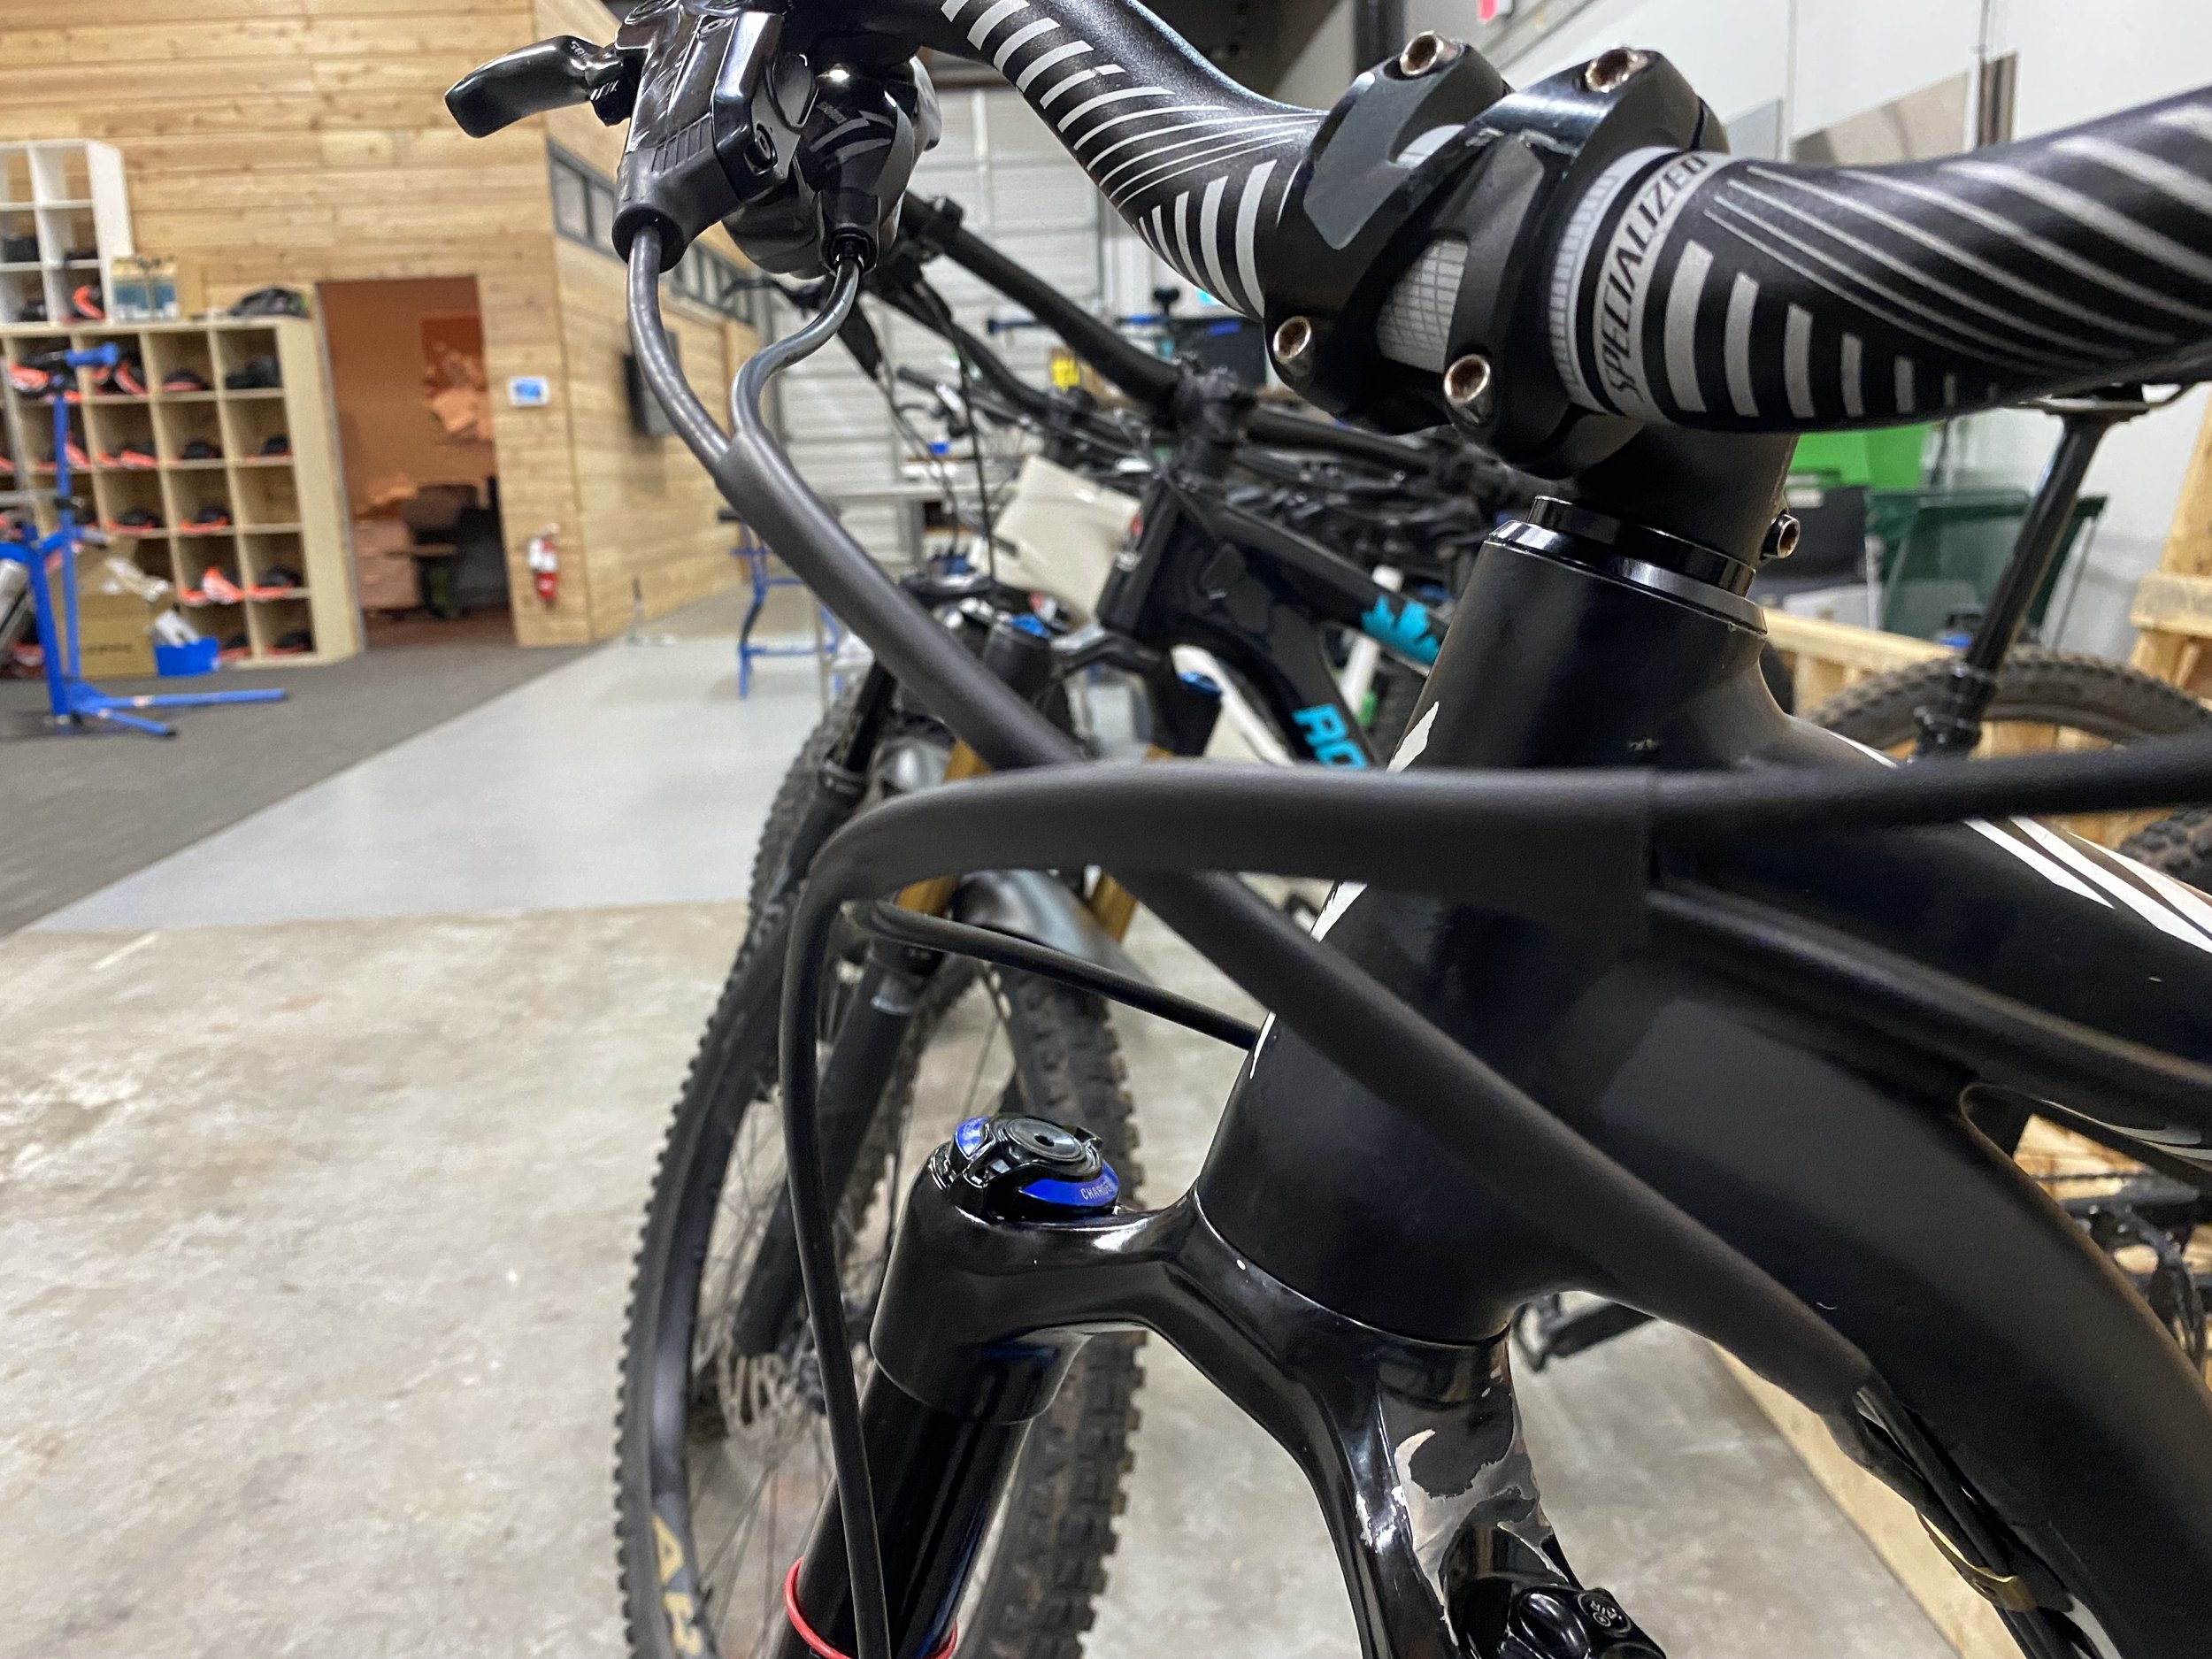  Shrink wrap has to be puled over the hose, so we recommend  opting for this upgrade when you bring your bike in for a bleed. Just let us know if you want some shrink wrap and we will get it done. 